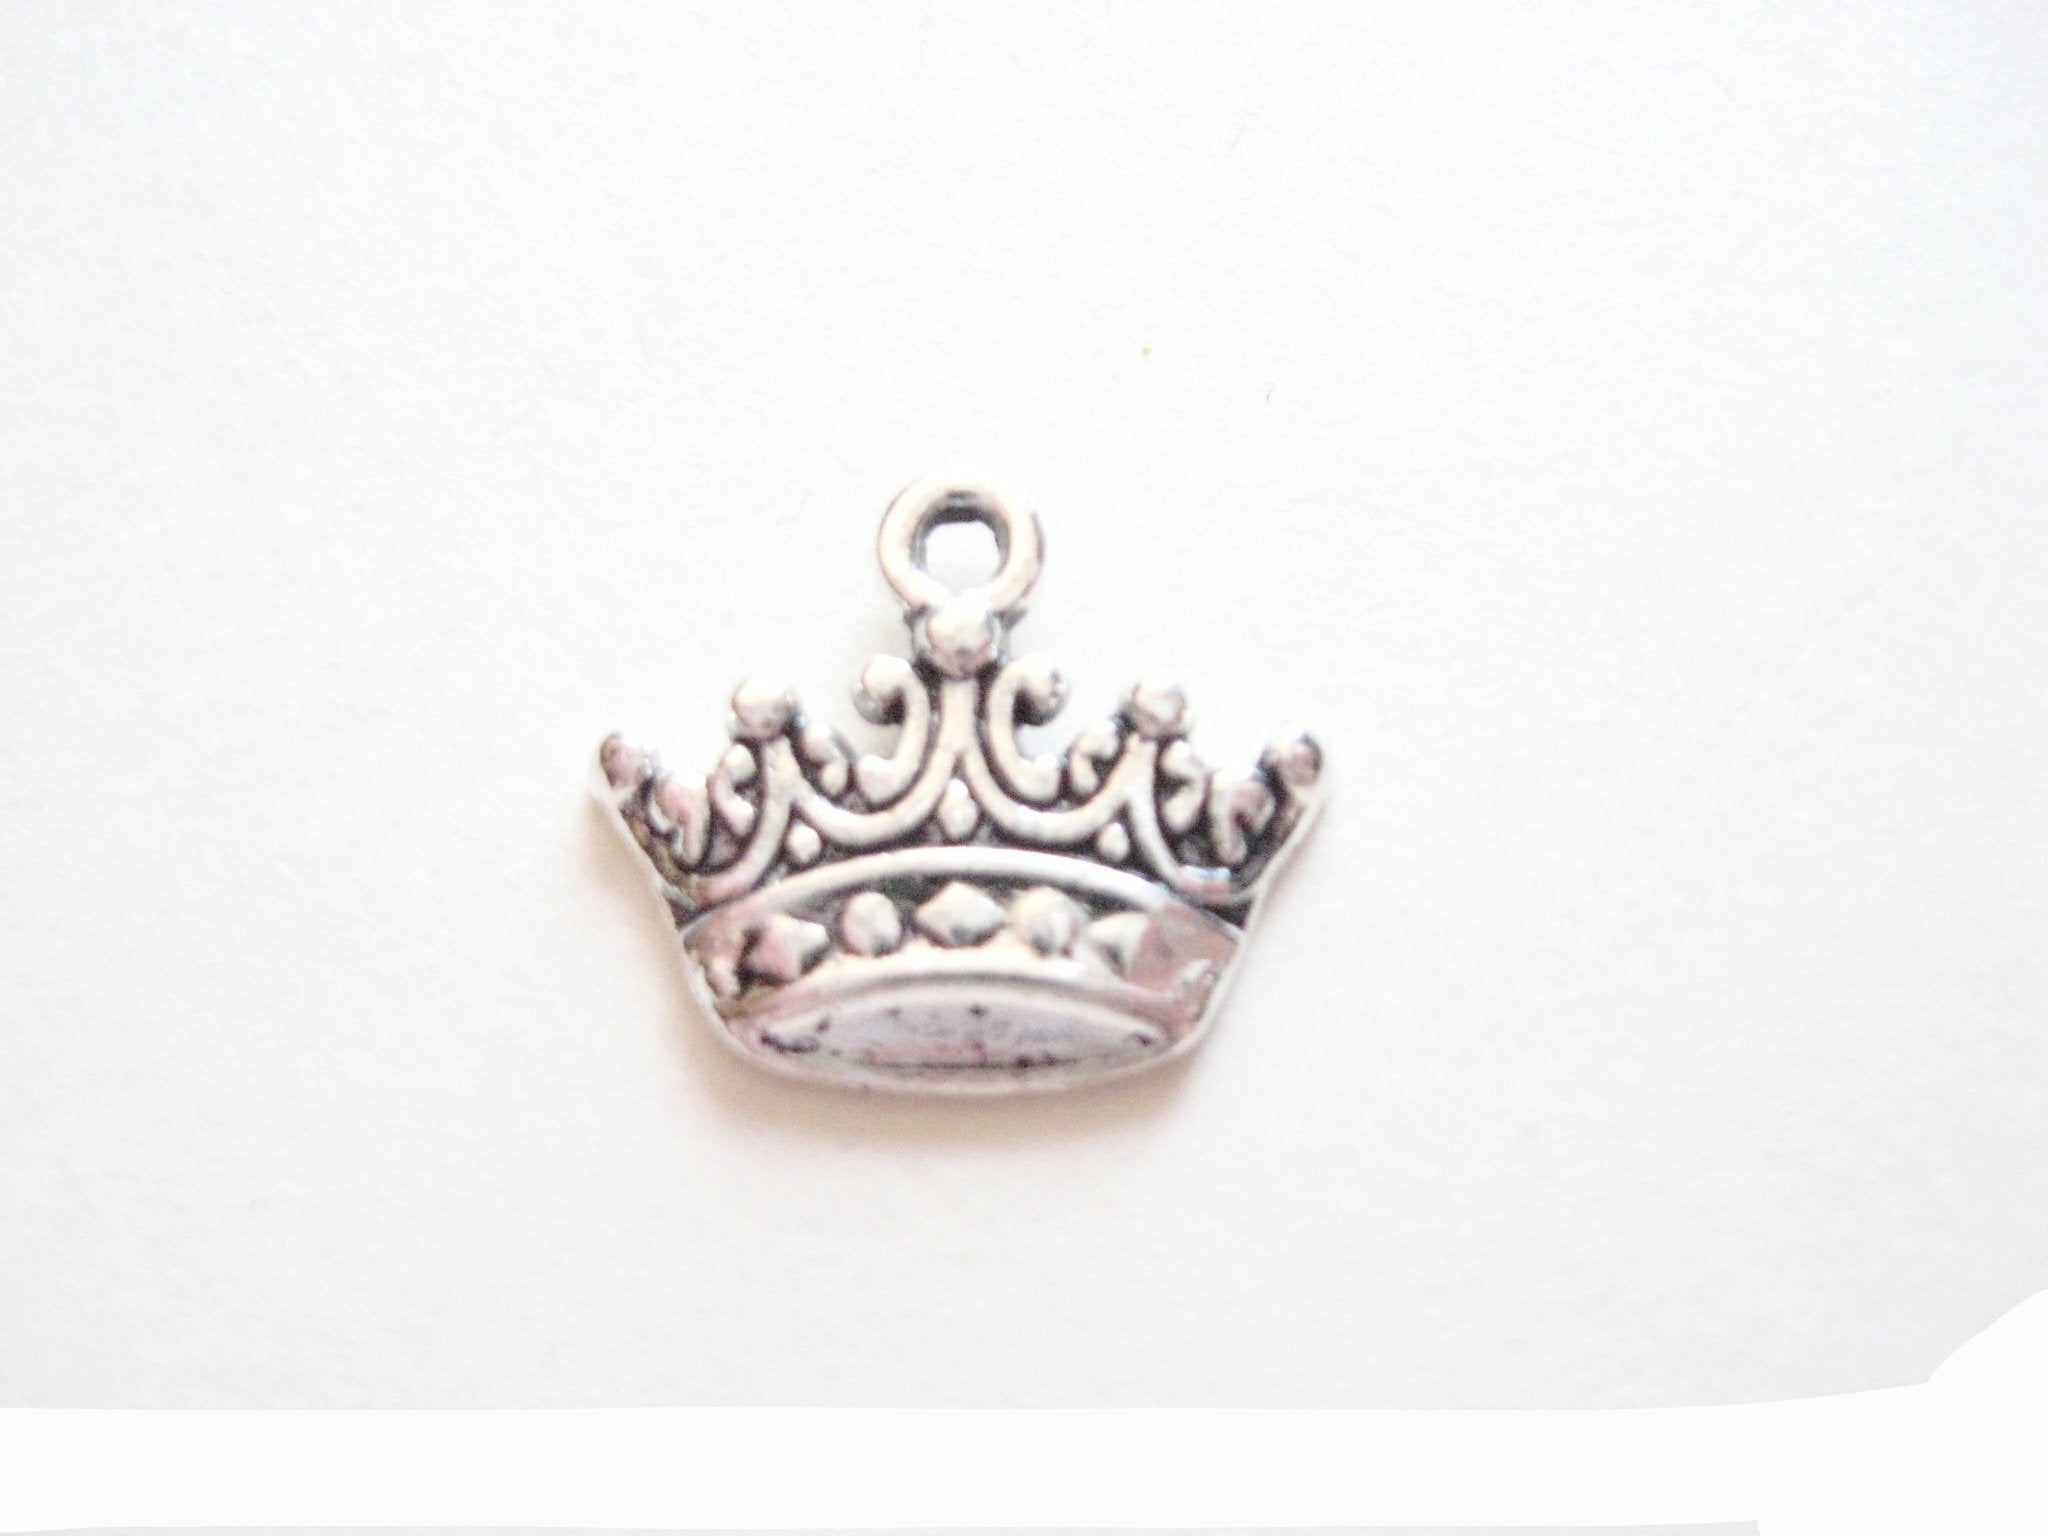 Antique Silver Princess Crown Pendant Charms (Jump Rings Included)